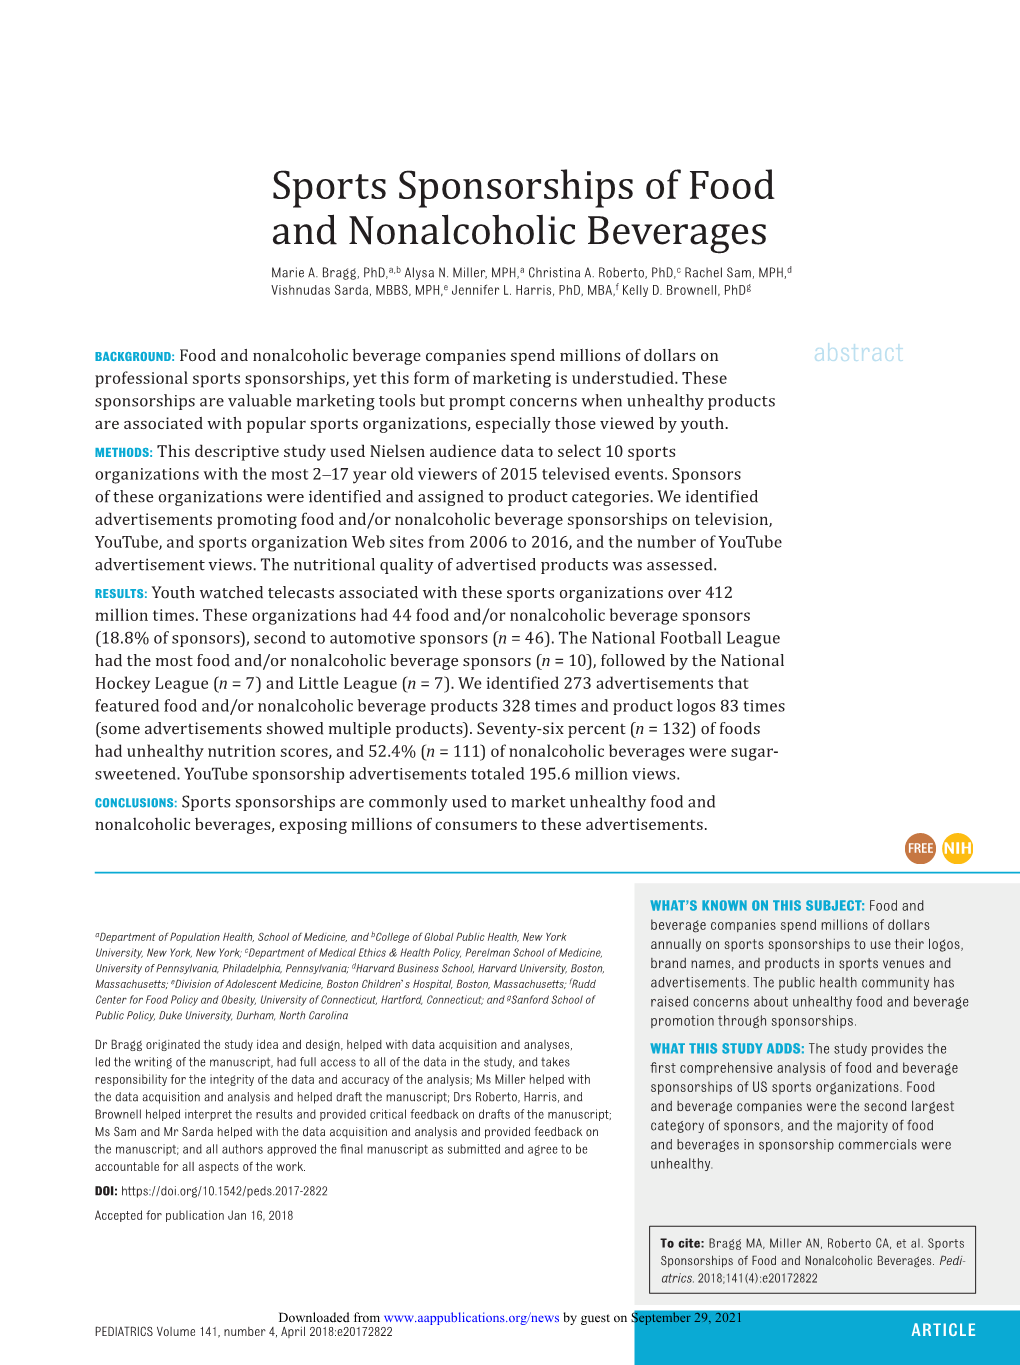 Sports Sponsorships of Food and Nonalcoholic Beverages